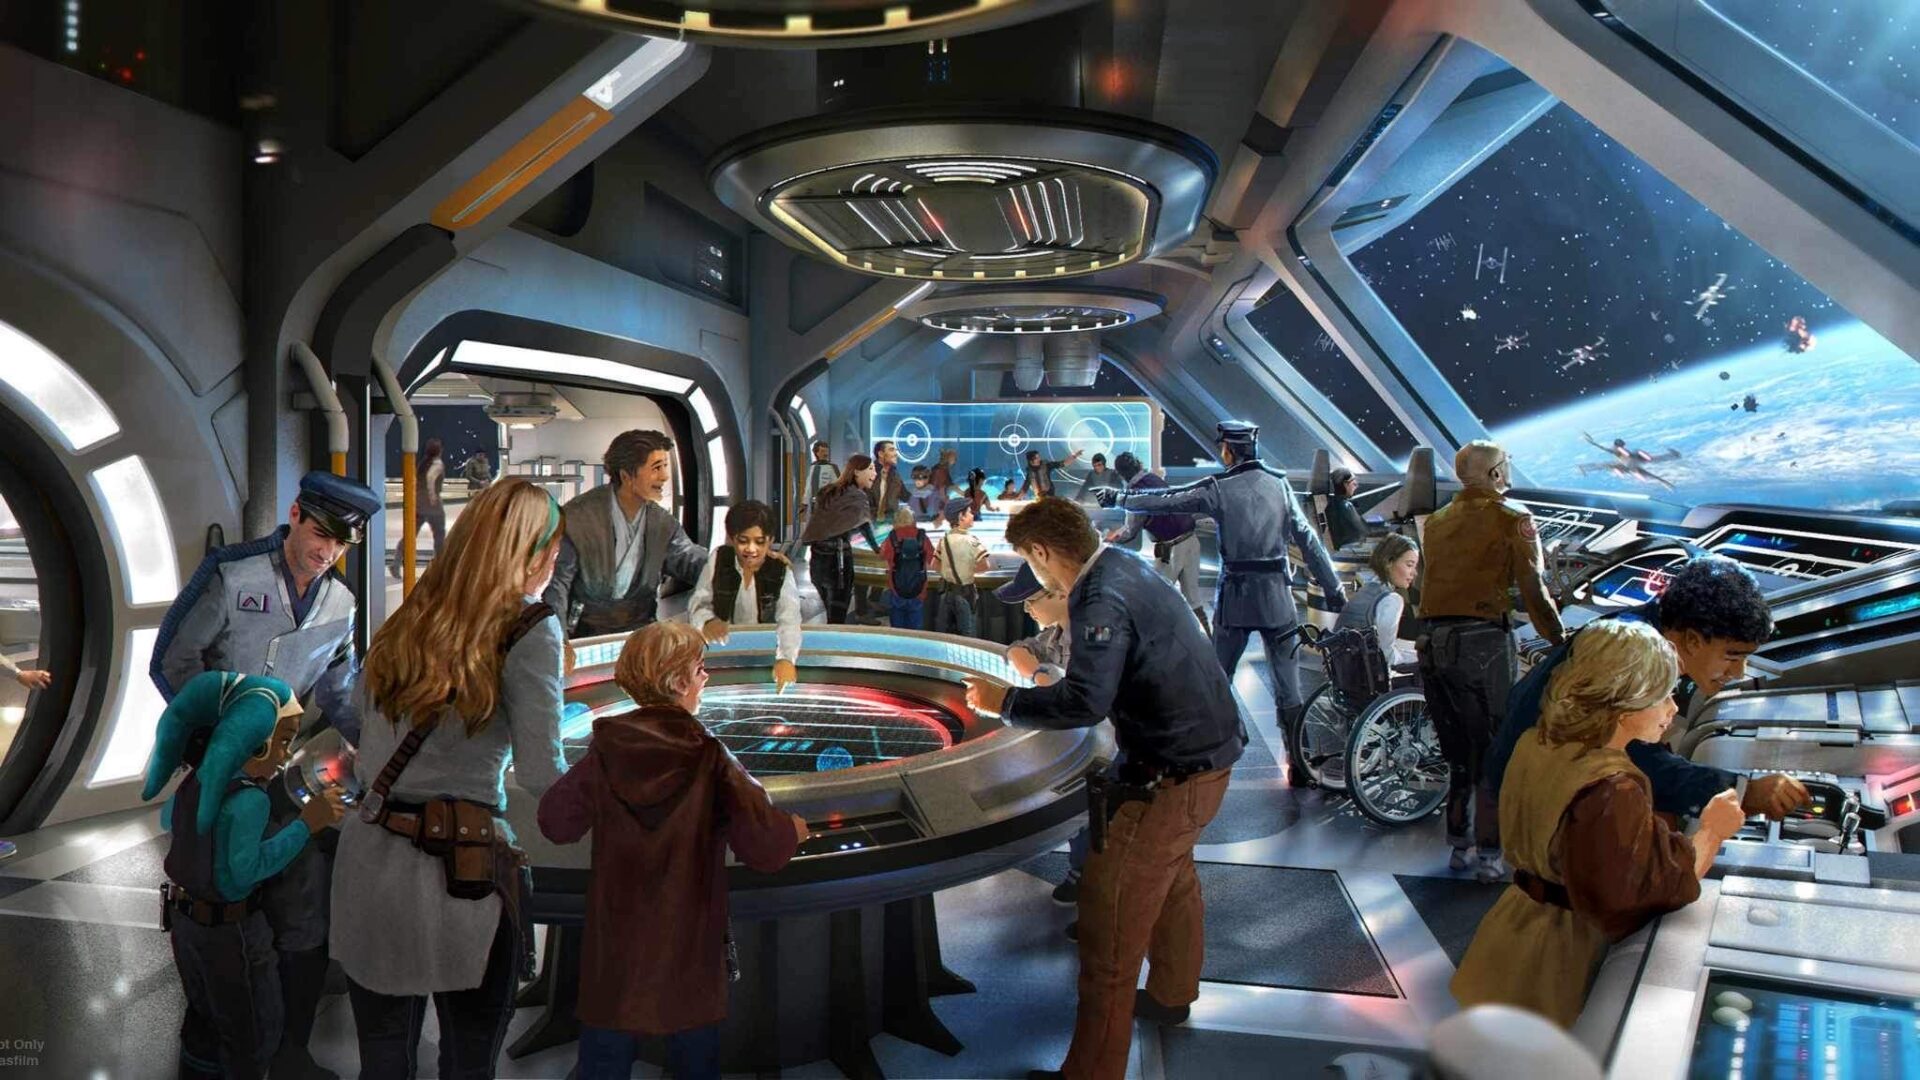 Star Wars: Galactic Starcruiser Permanently Closing in September